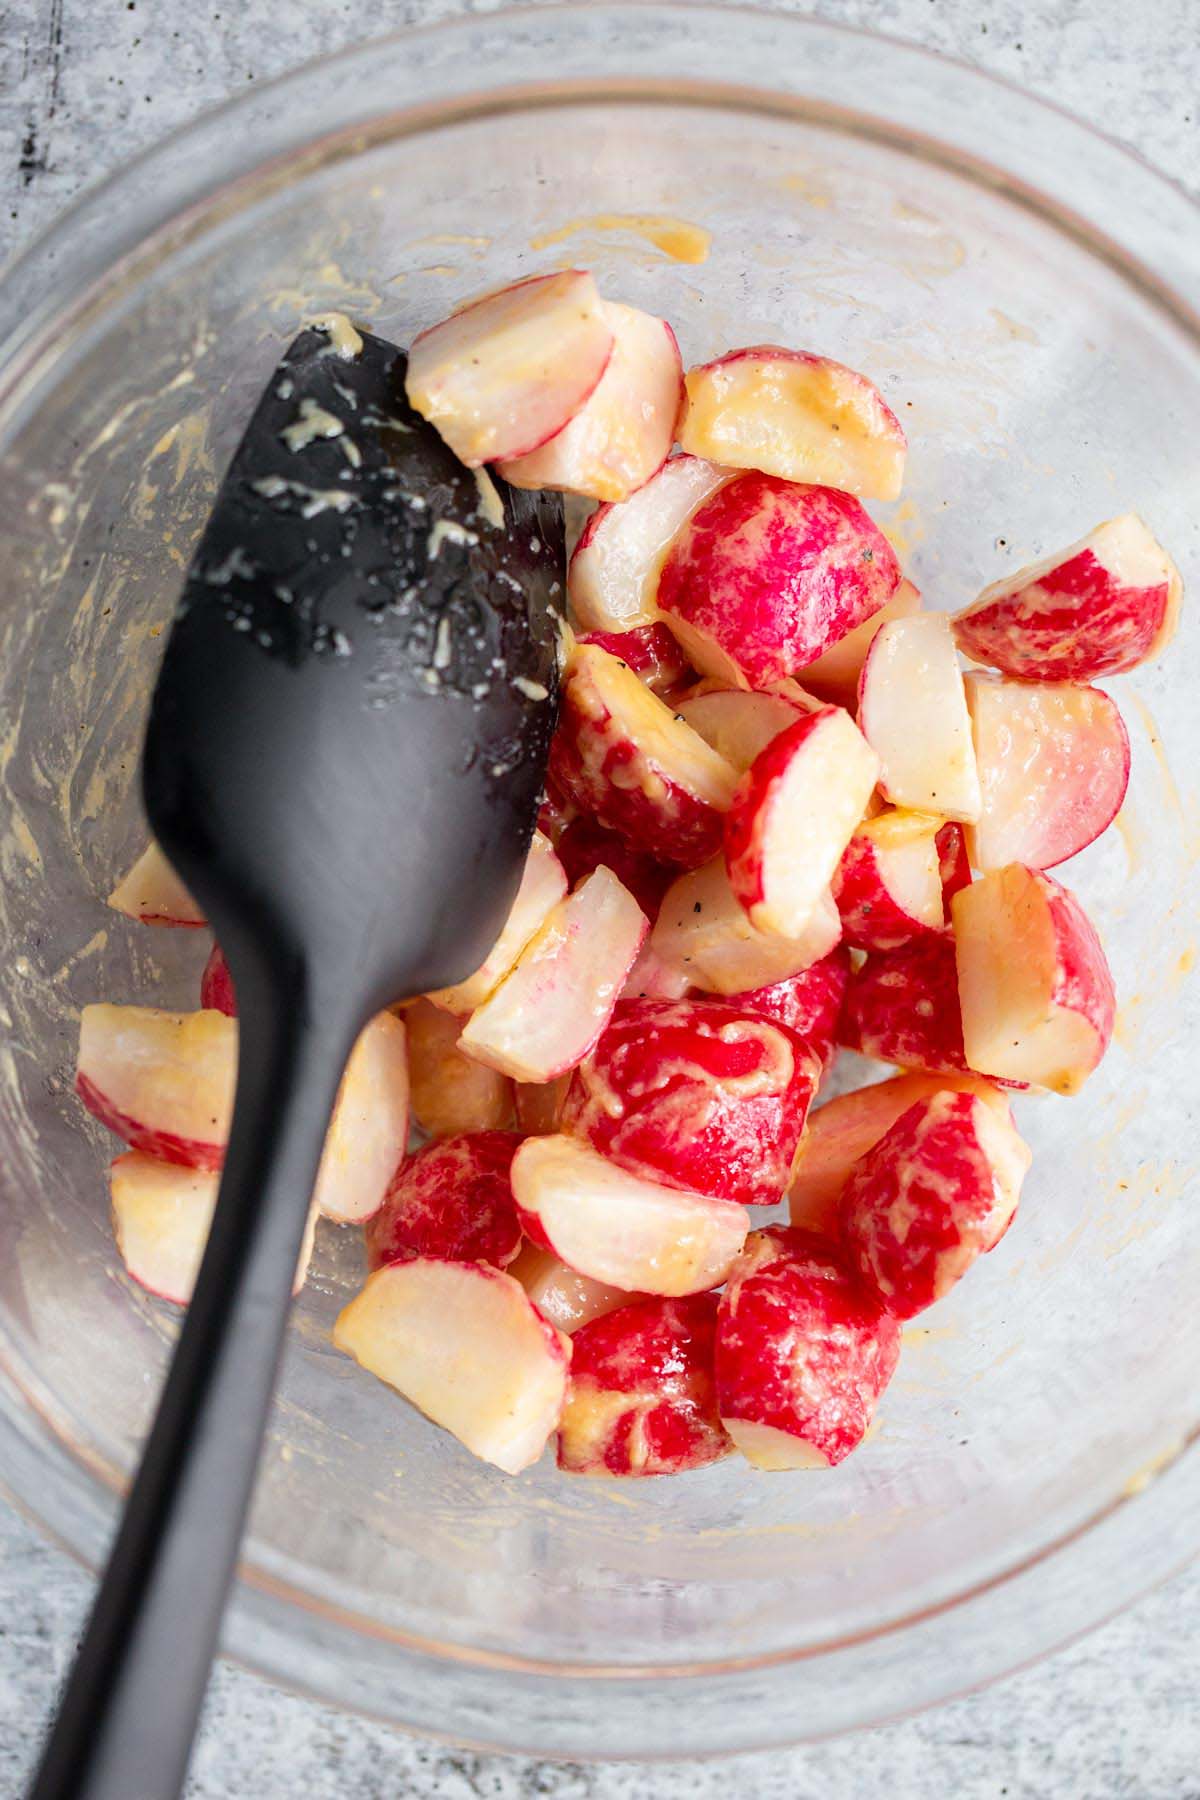 Radishes tossed in miso.